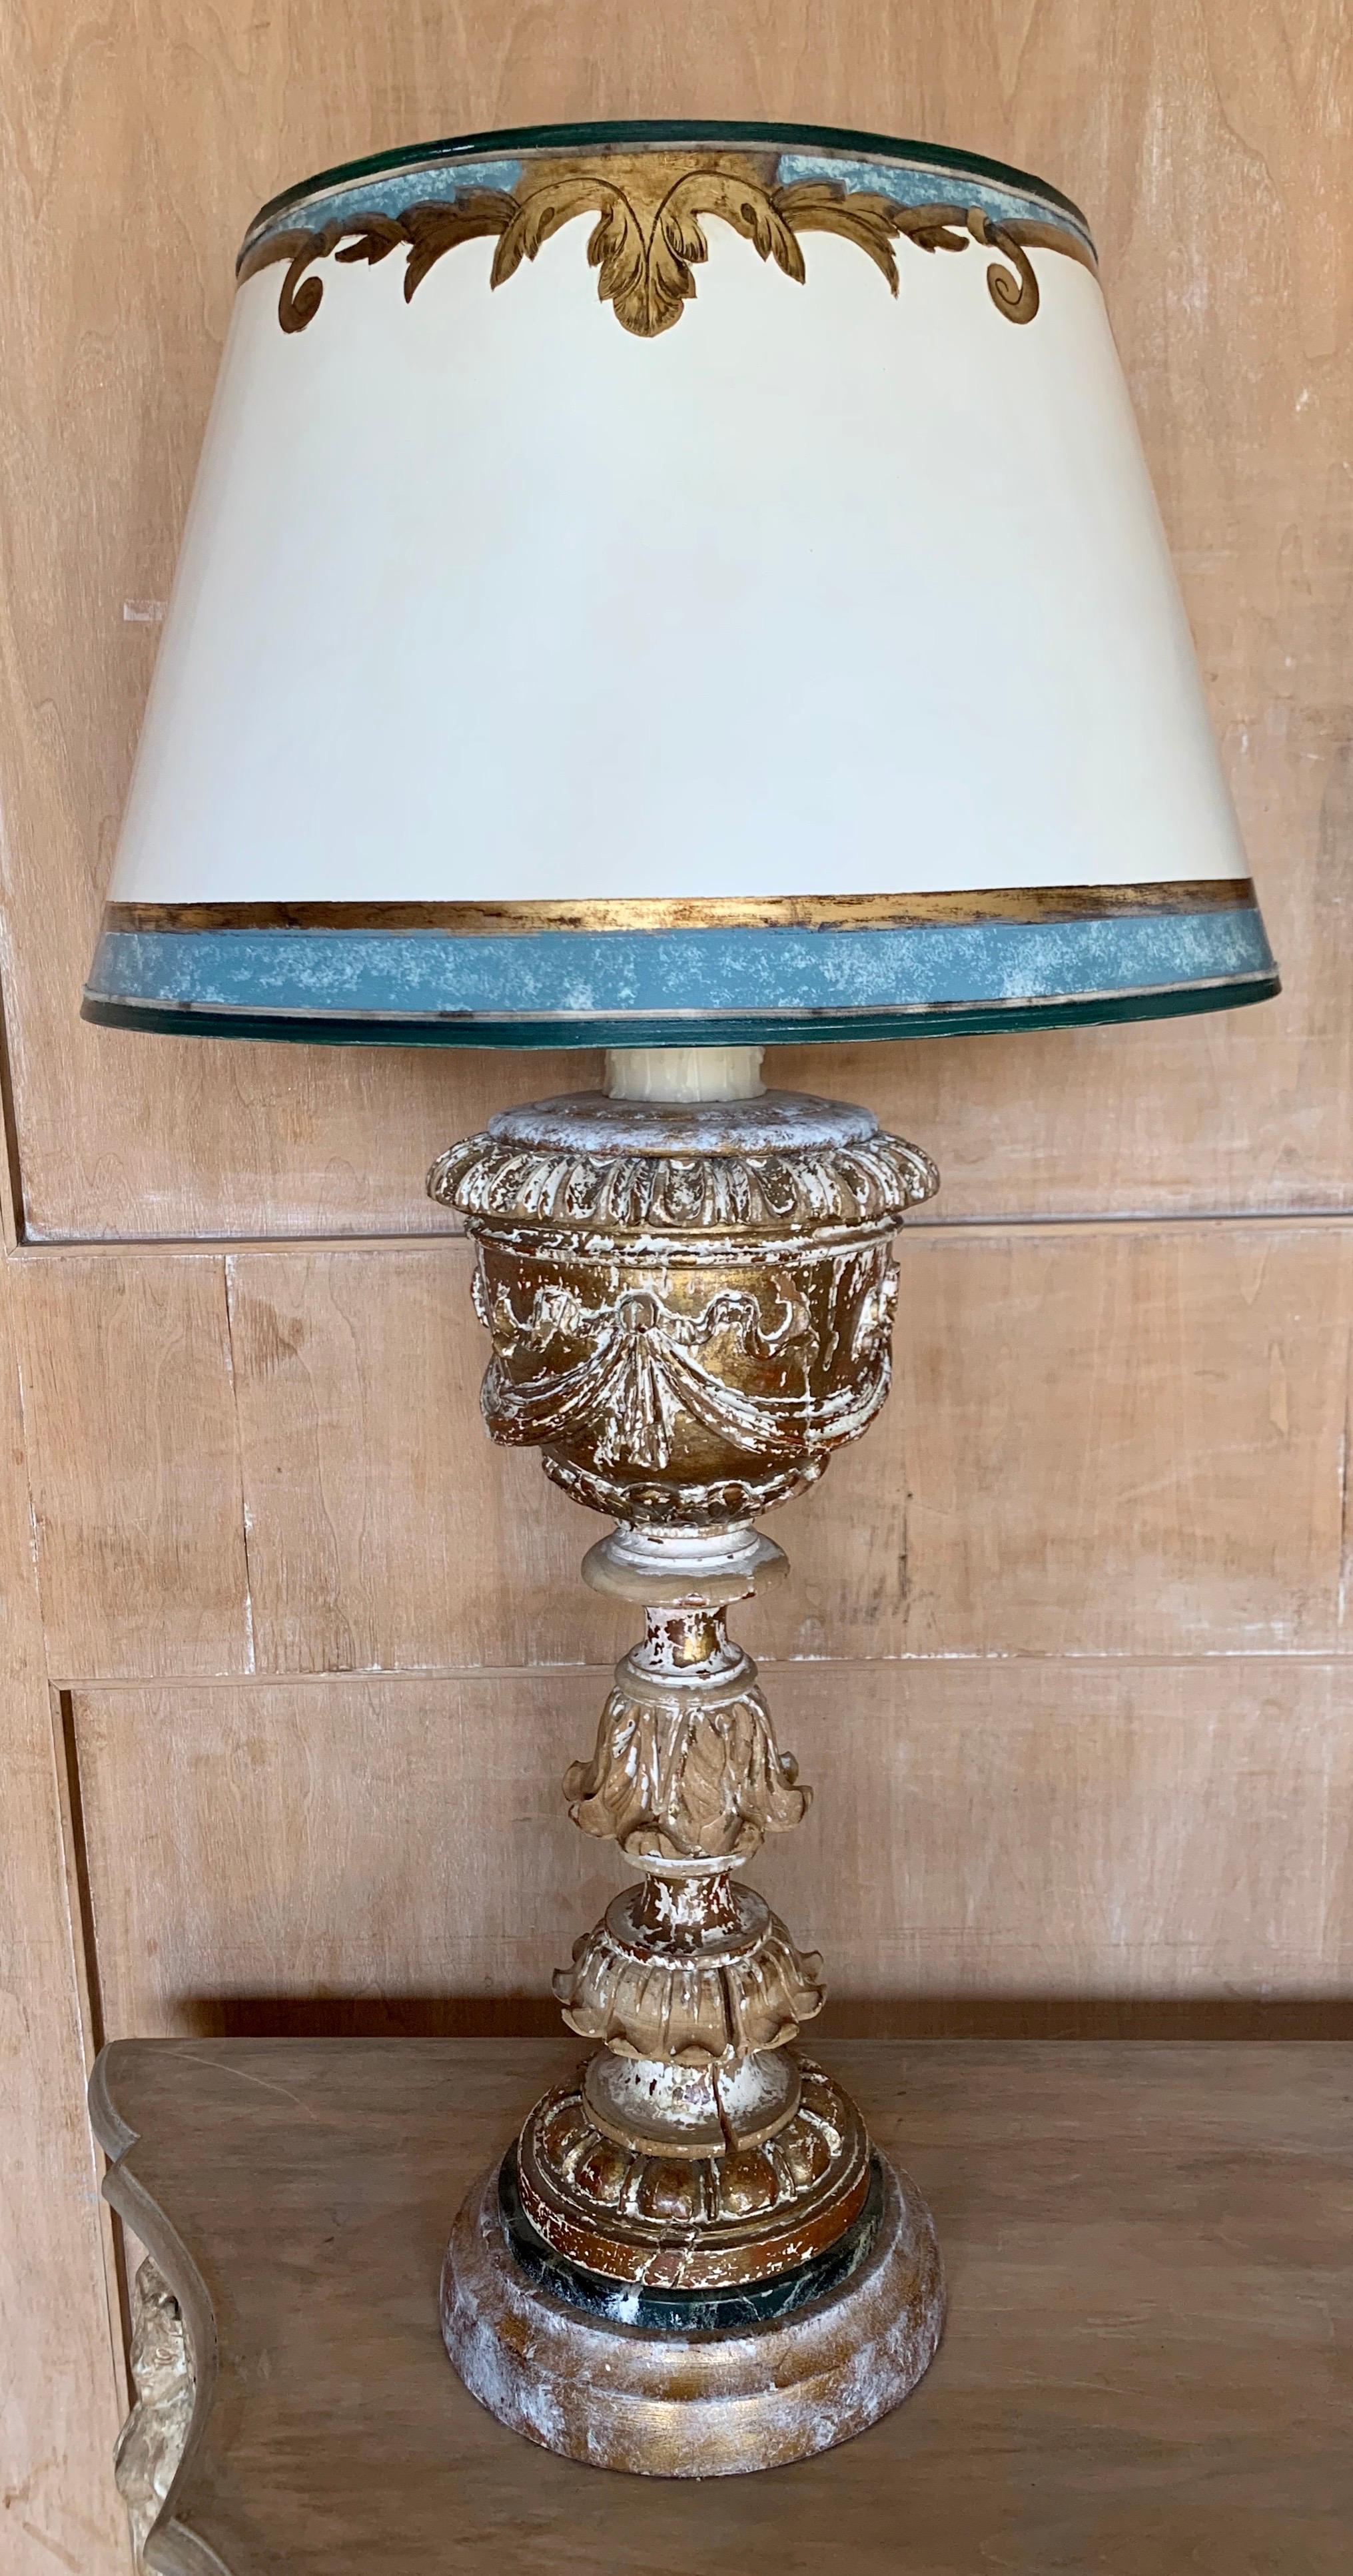 Baroque Pair of Italian Giltwood Lamps with Parchment Shades